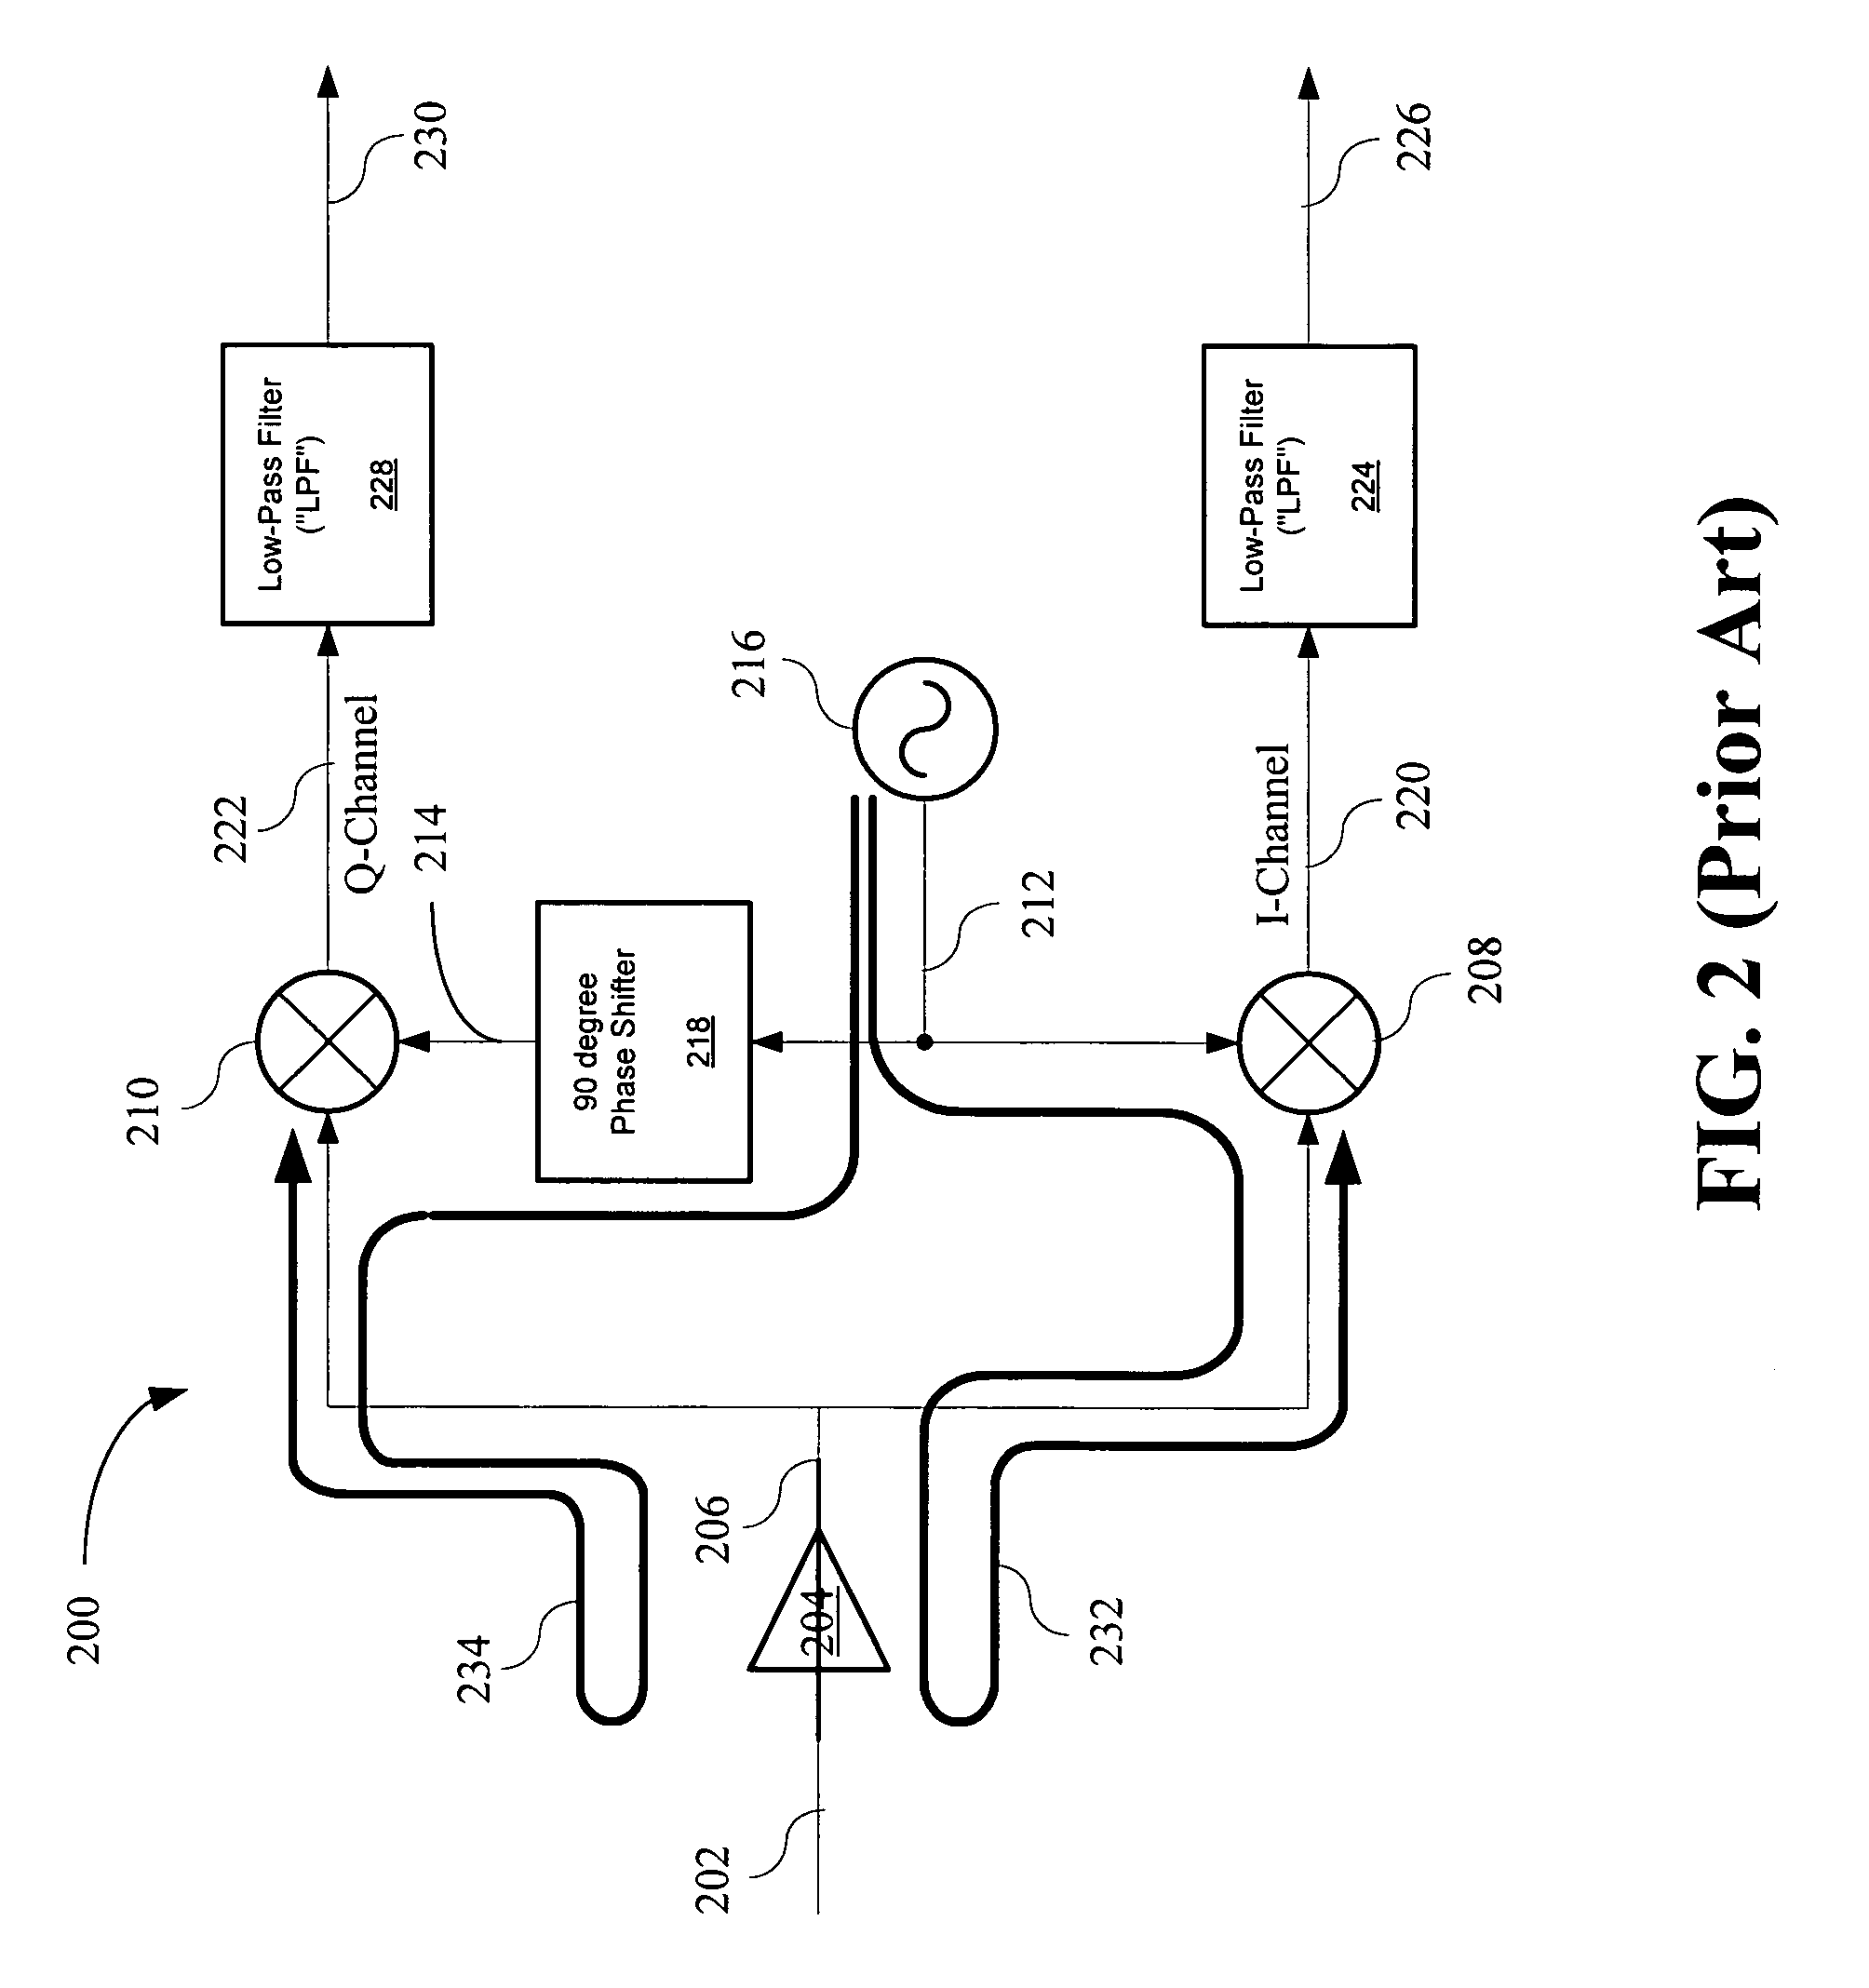 DC offset correction for direct-conversion receiver